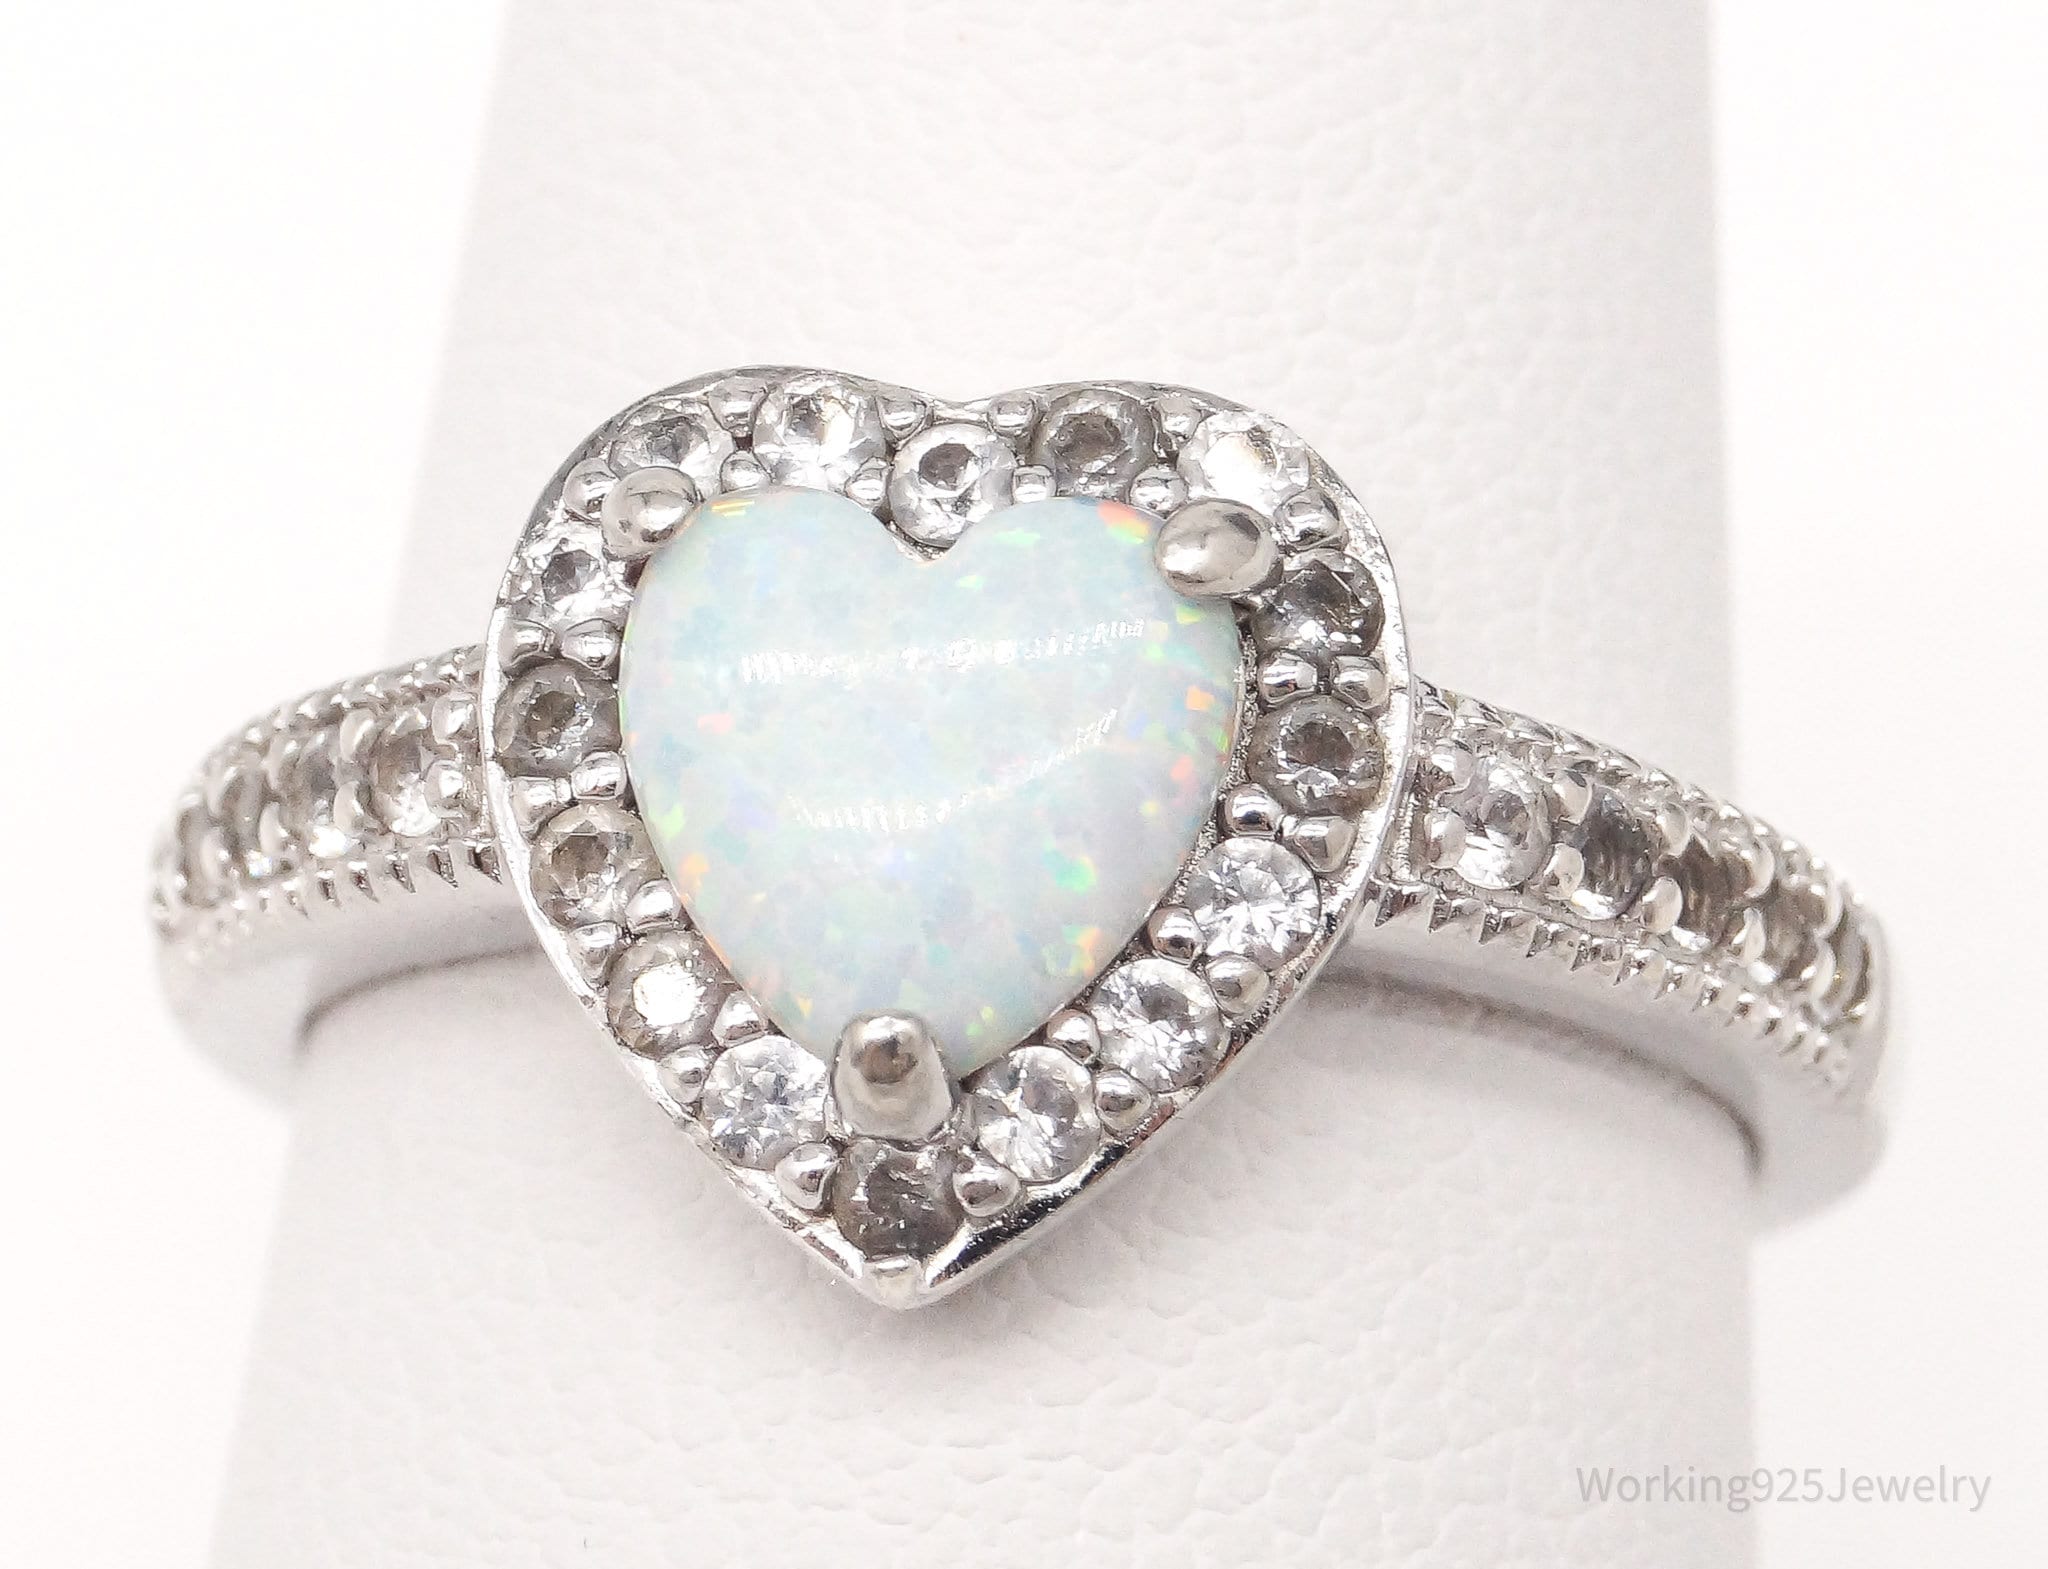 Vintage PAJ Opal & Cubic Zirconia Sterling Silver Ring - Size 7